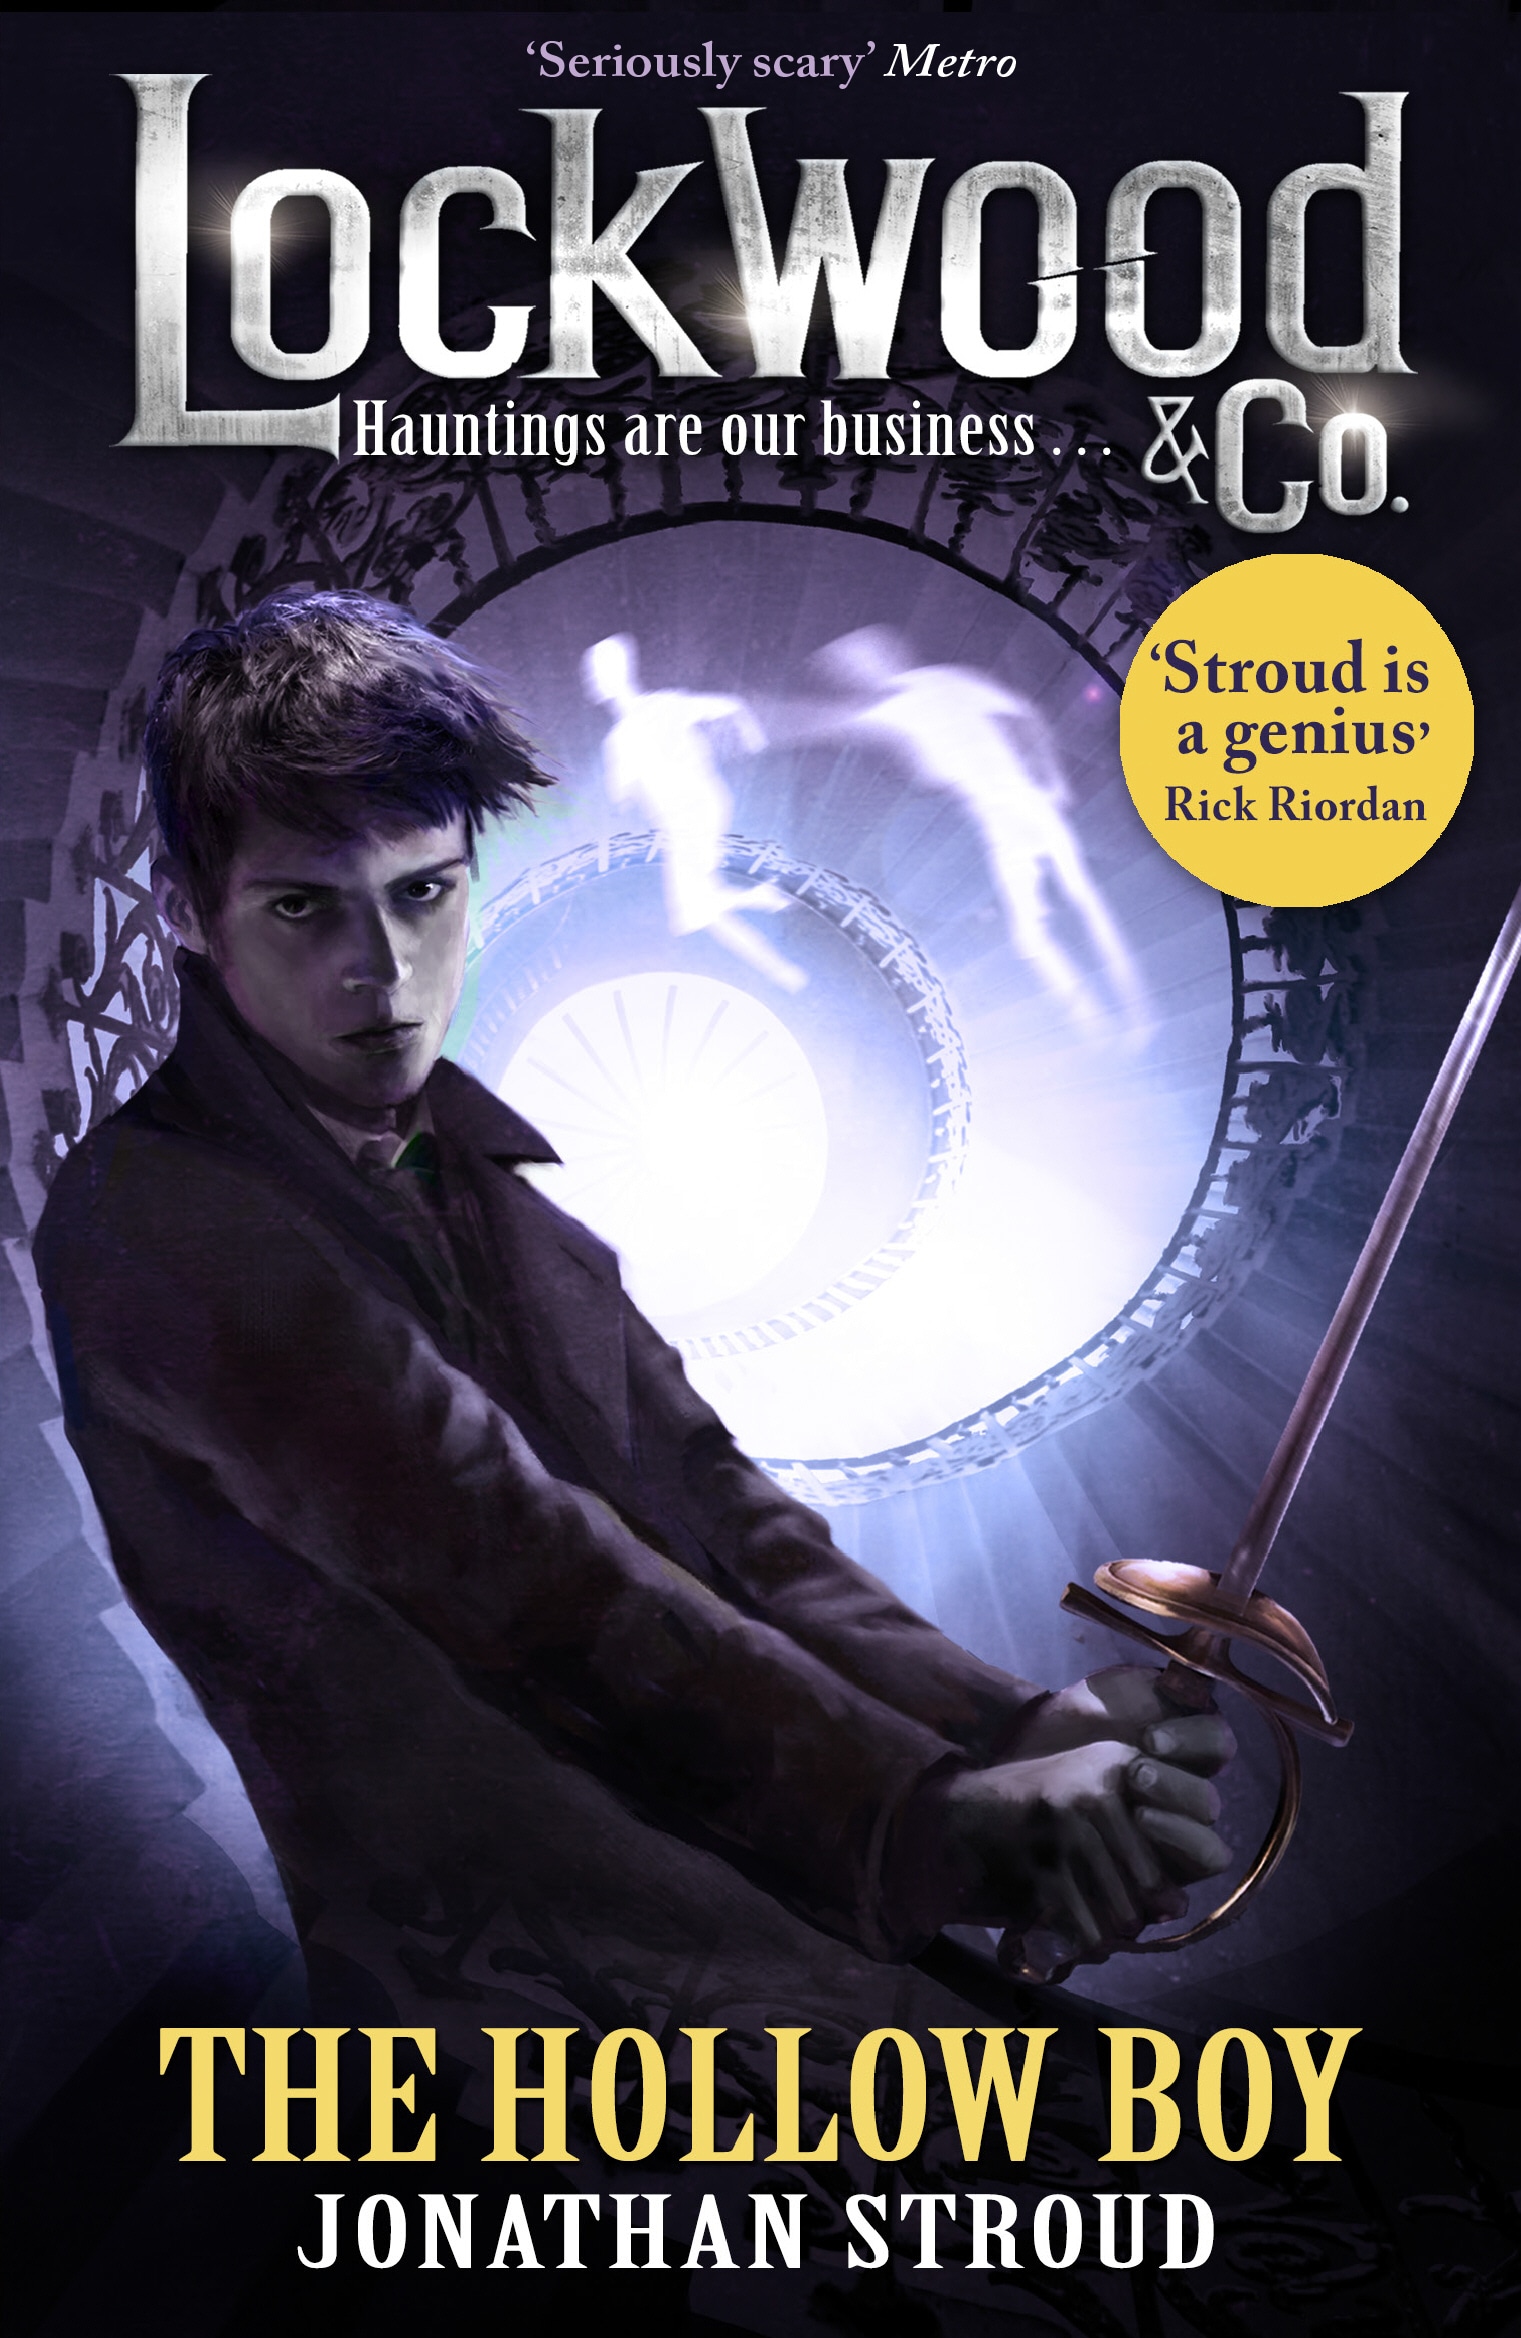 Book “Lockwood & Co: The Hollow Boy” by Jonathan Stroud — September 24, 2015